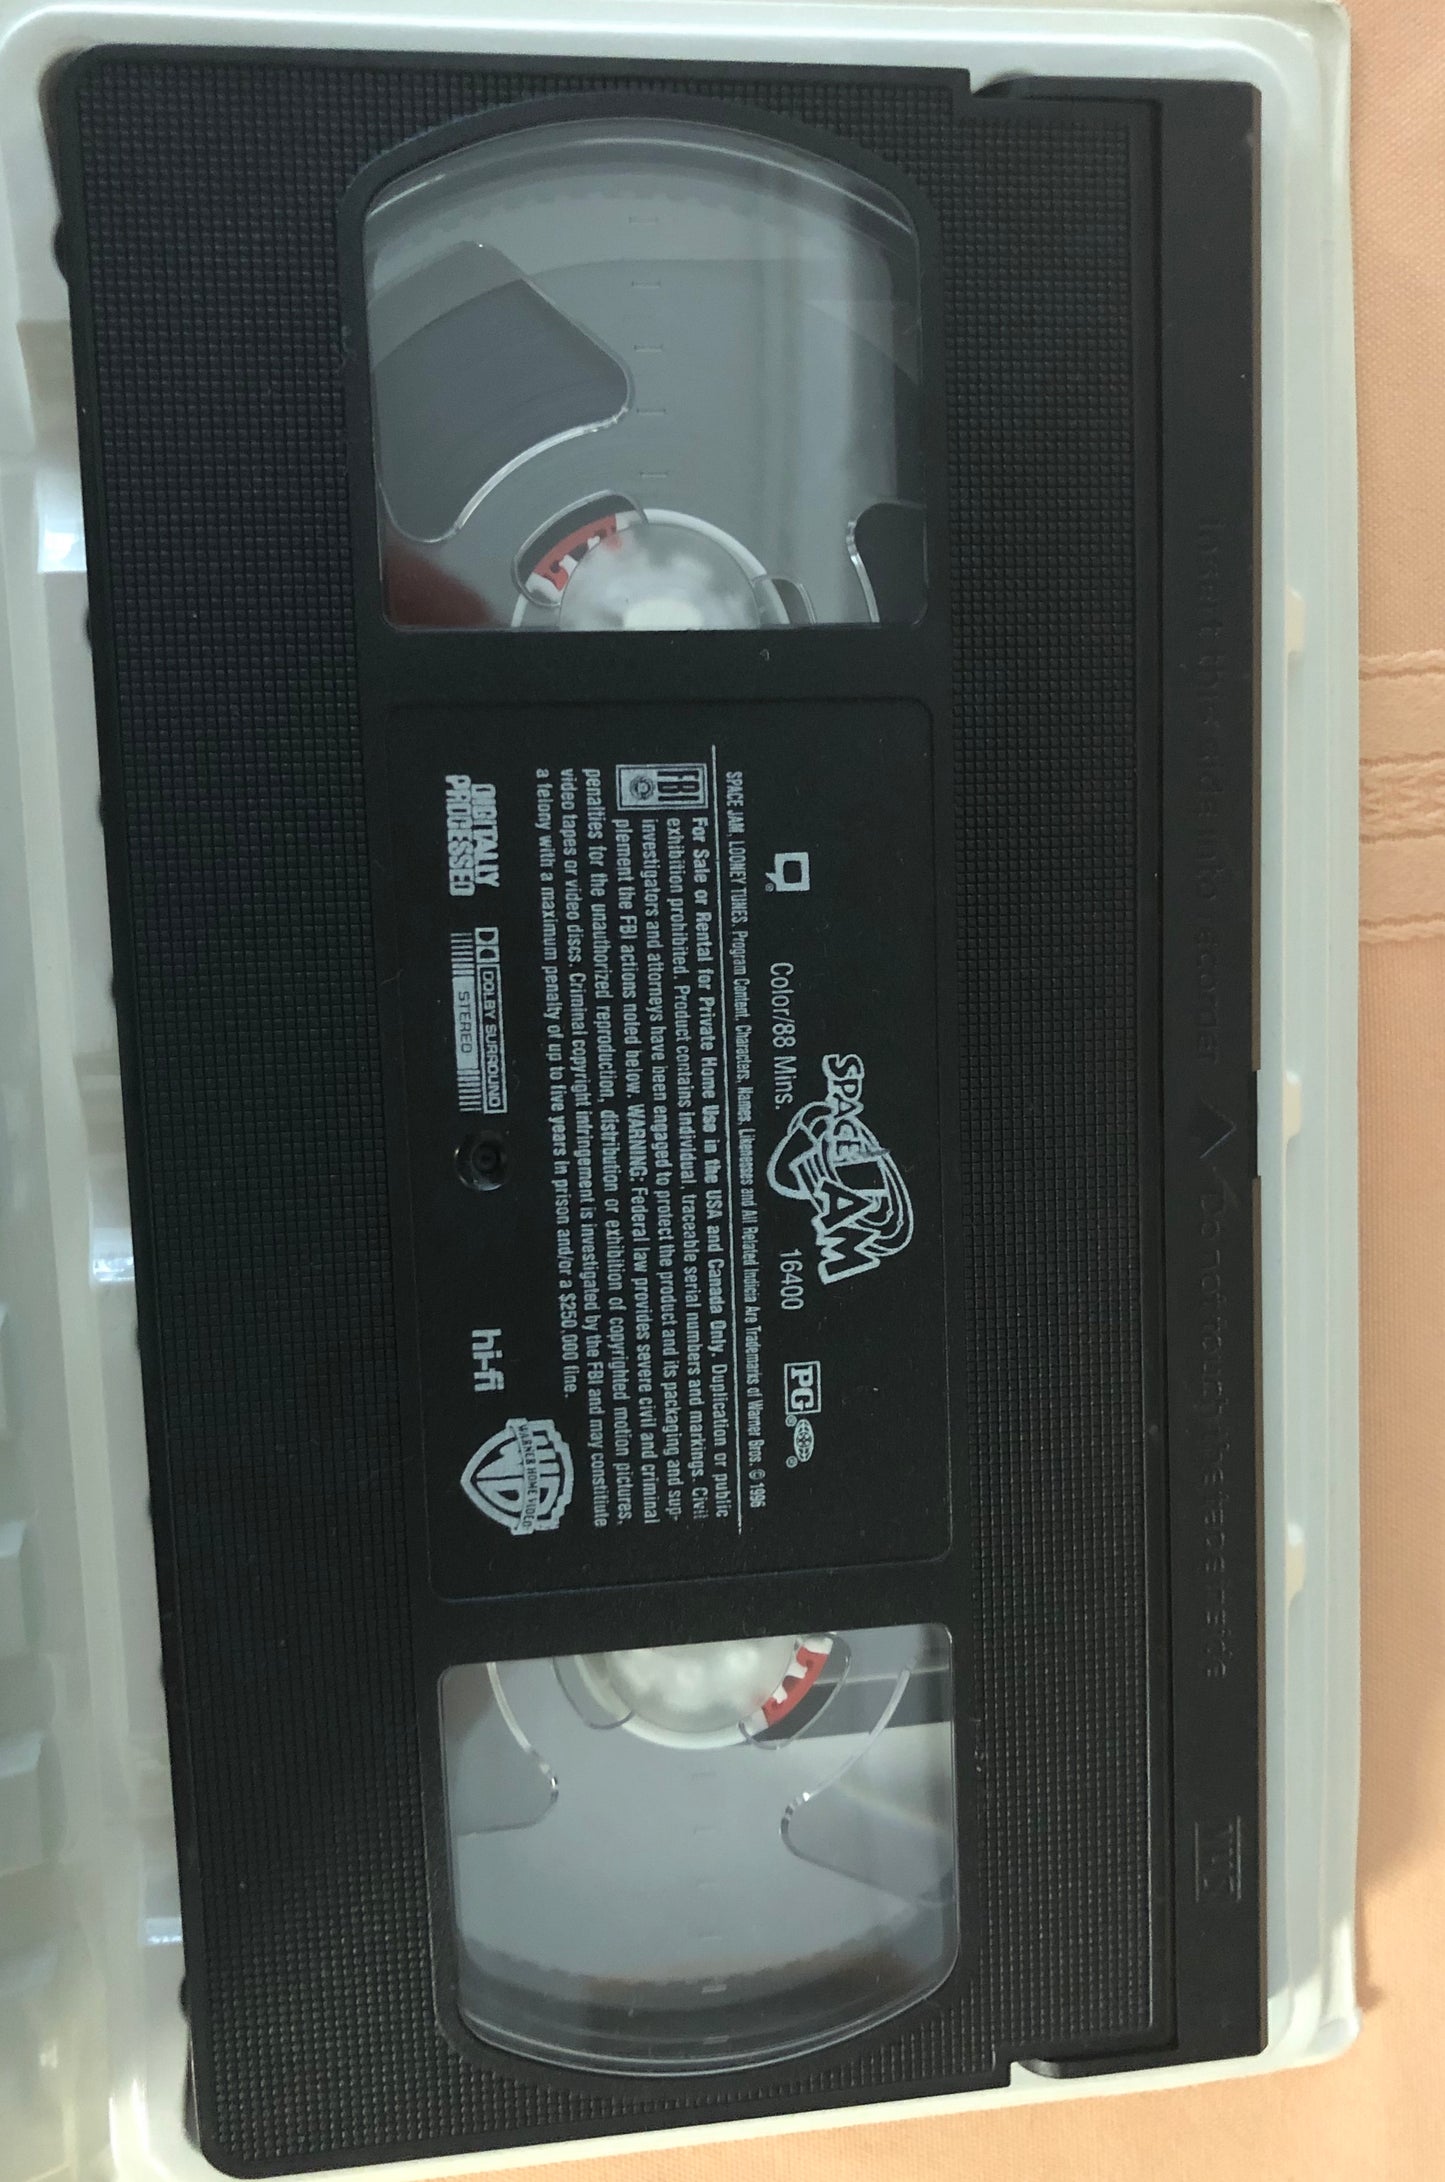 Space Jam (1996) on VHS with Commemorative Coin